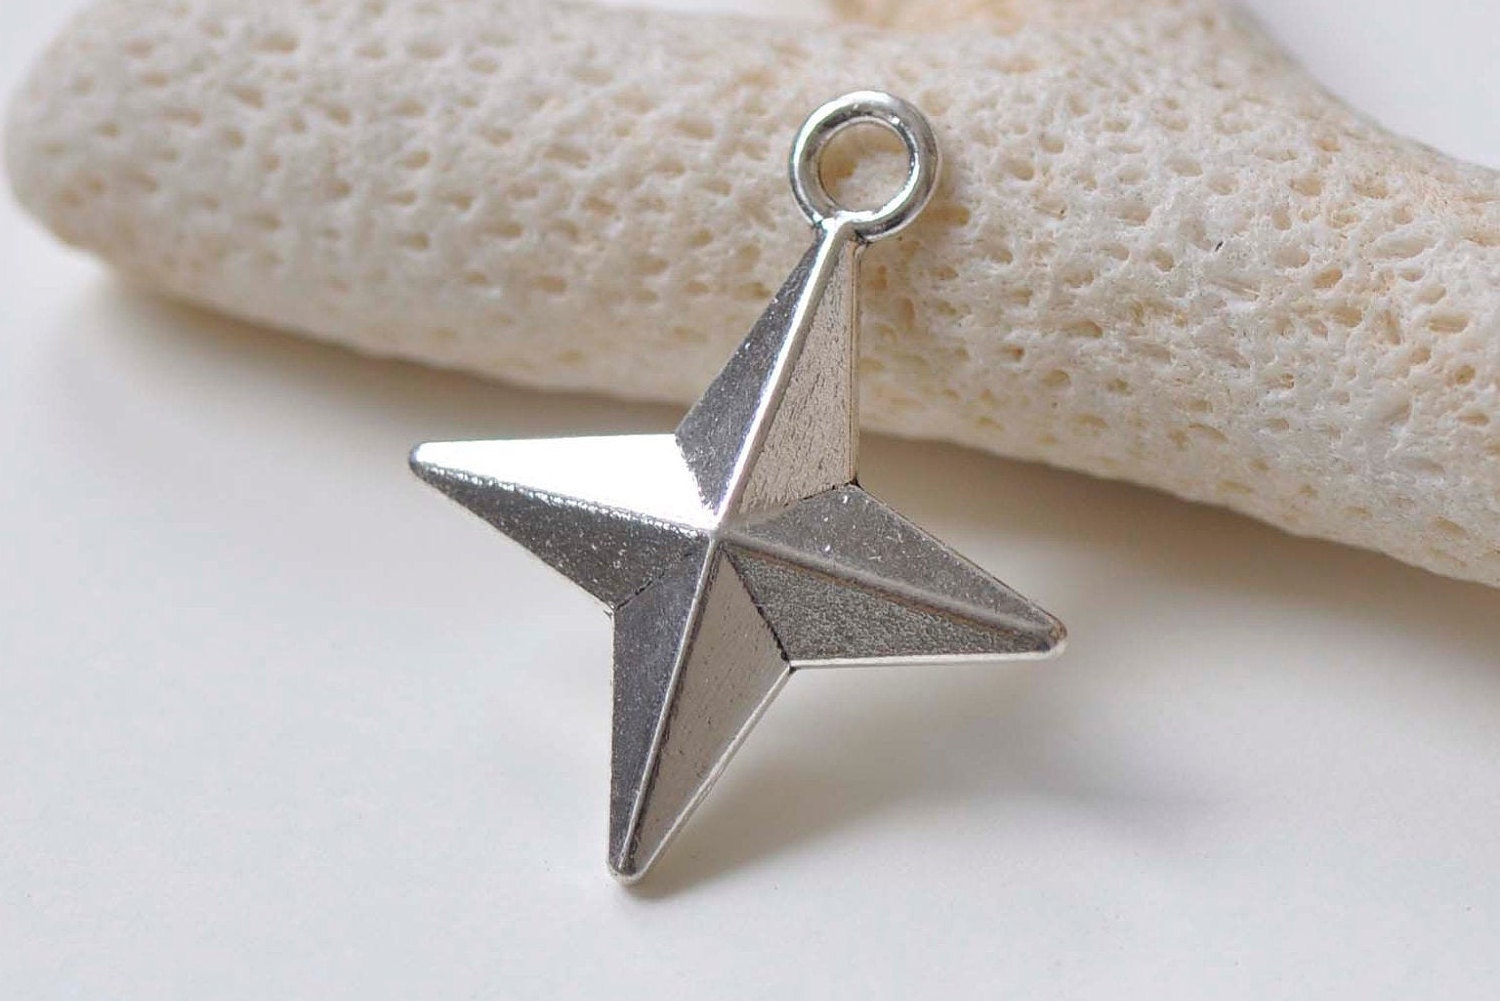 10 Pcs Lot, 45mm Long Star Charms for Jewelry Making Shiny Silver